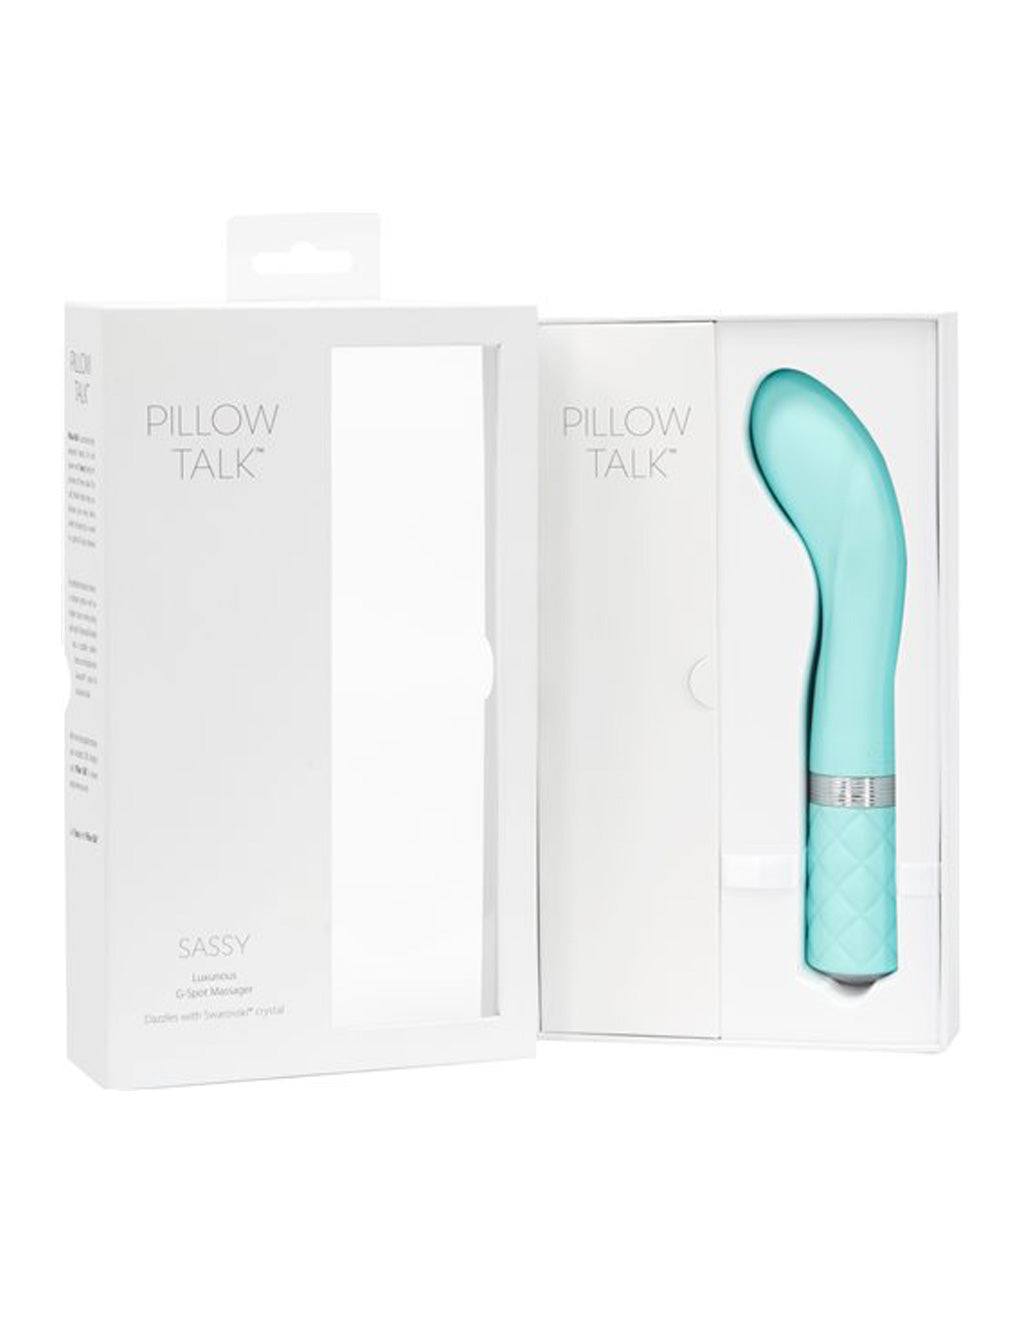 BMS Factory Pillow Talk Sassy Teal in Box